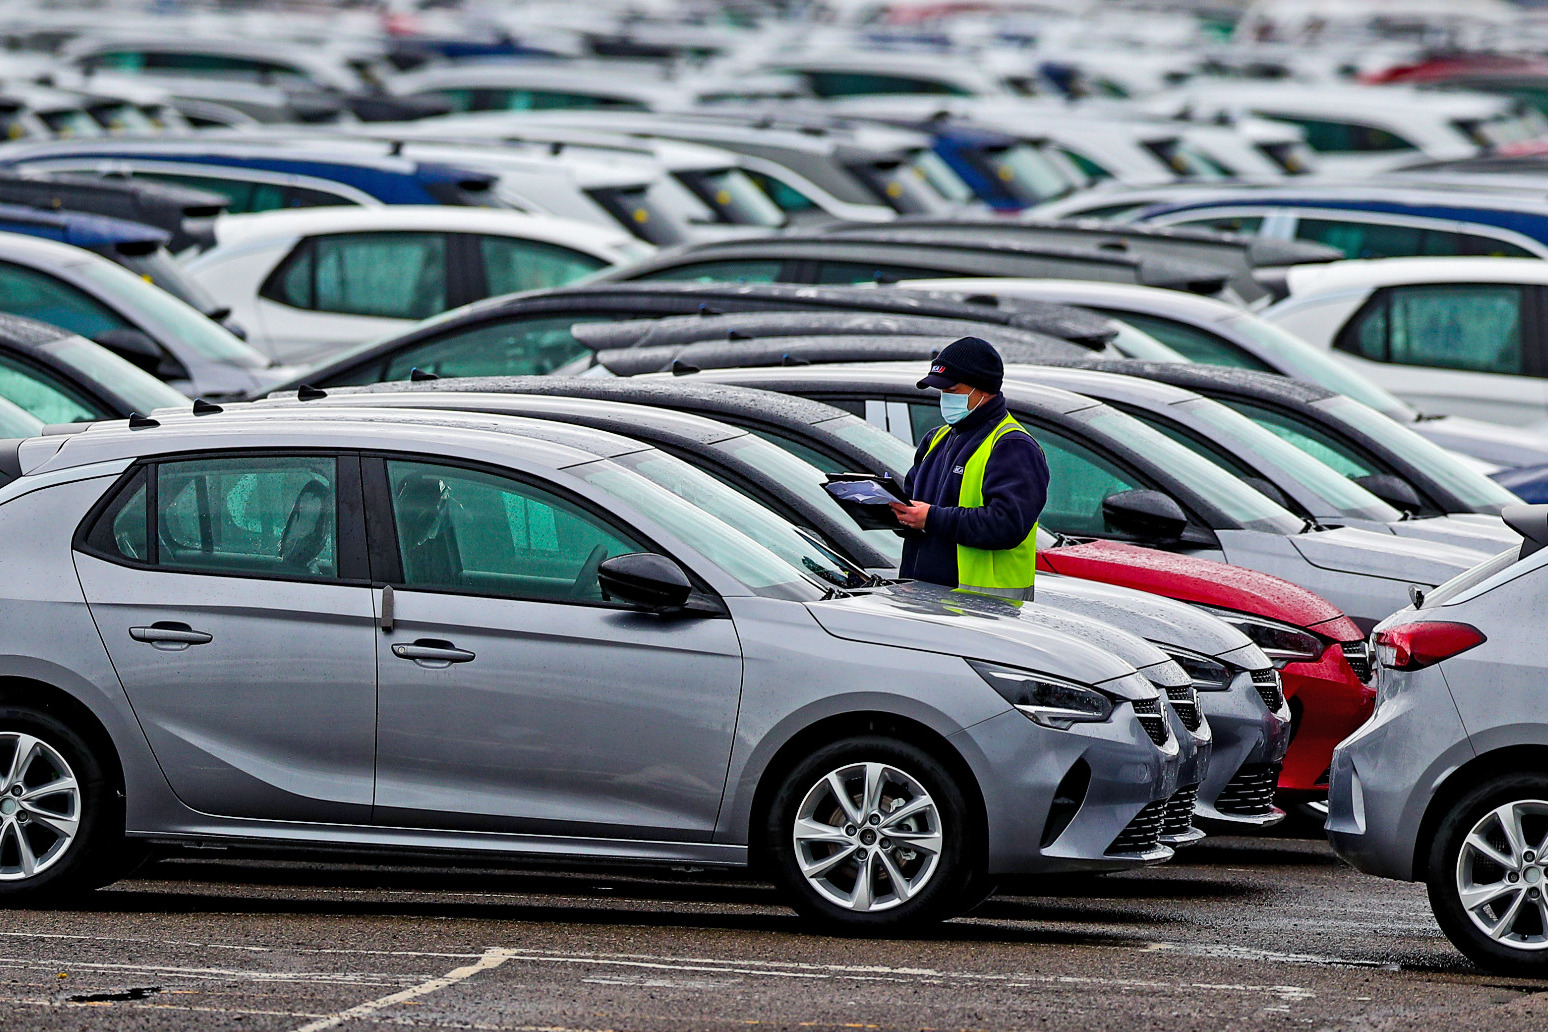 New car sales down 23% on pre-pandemic levels 